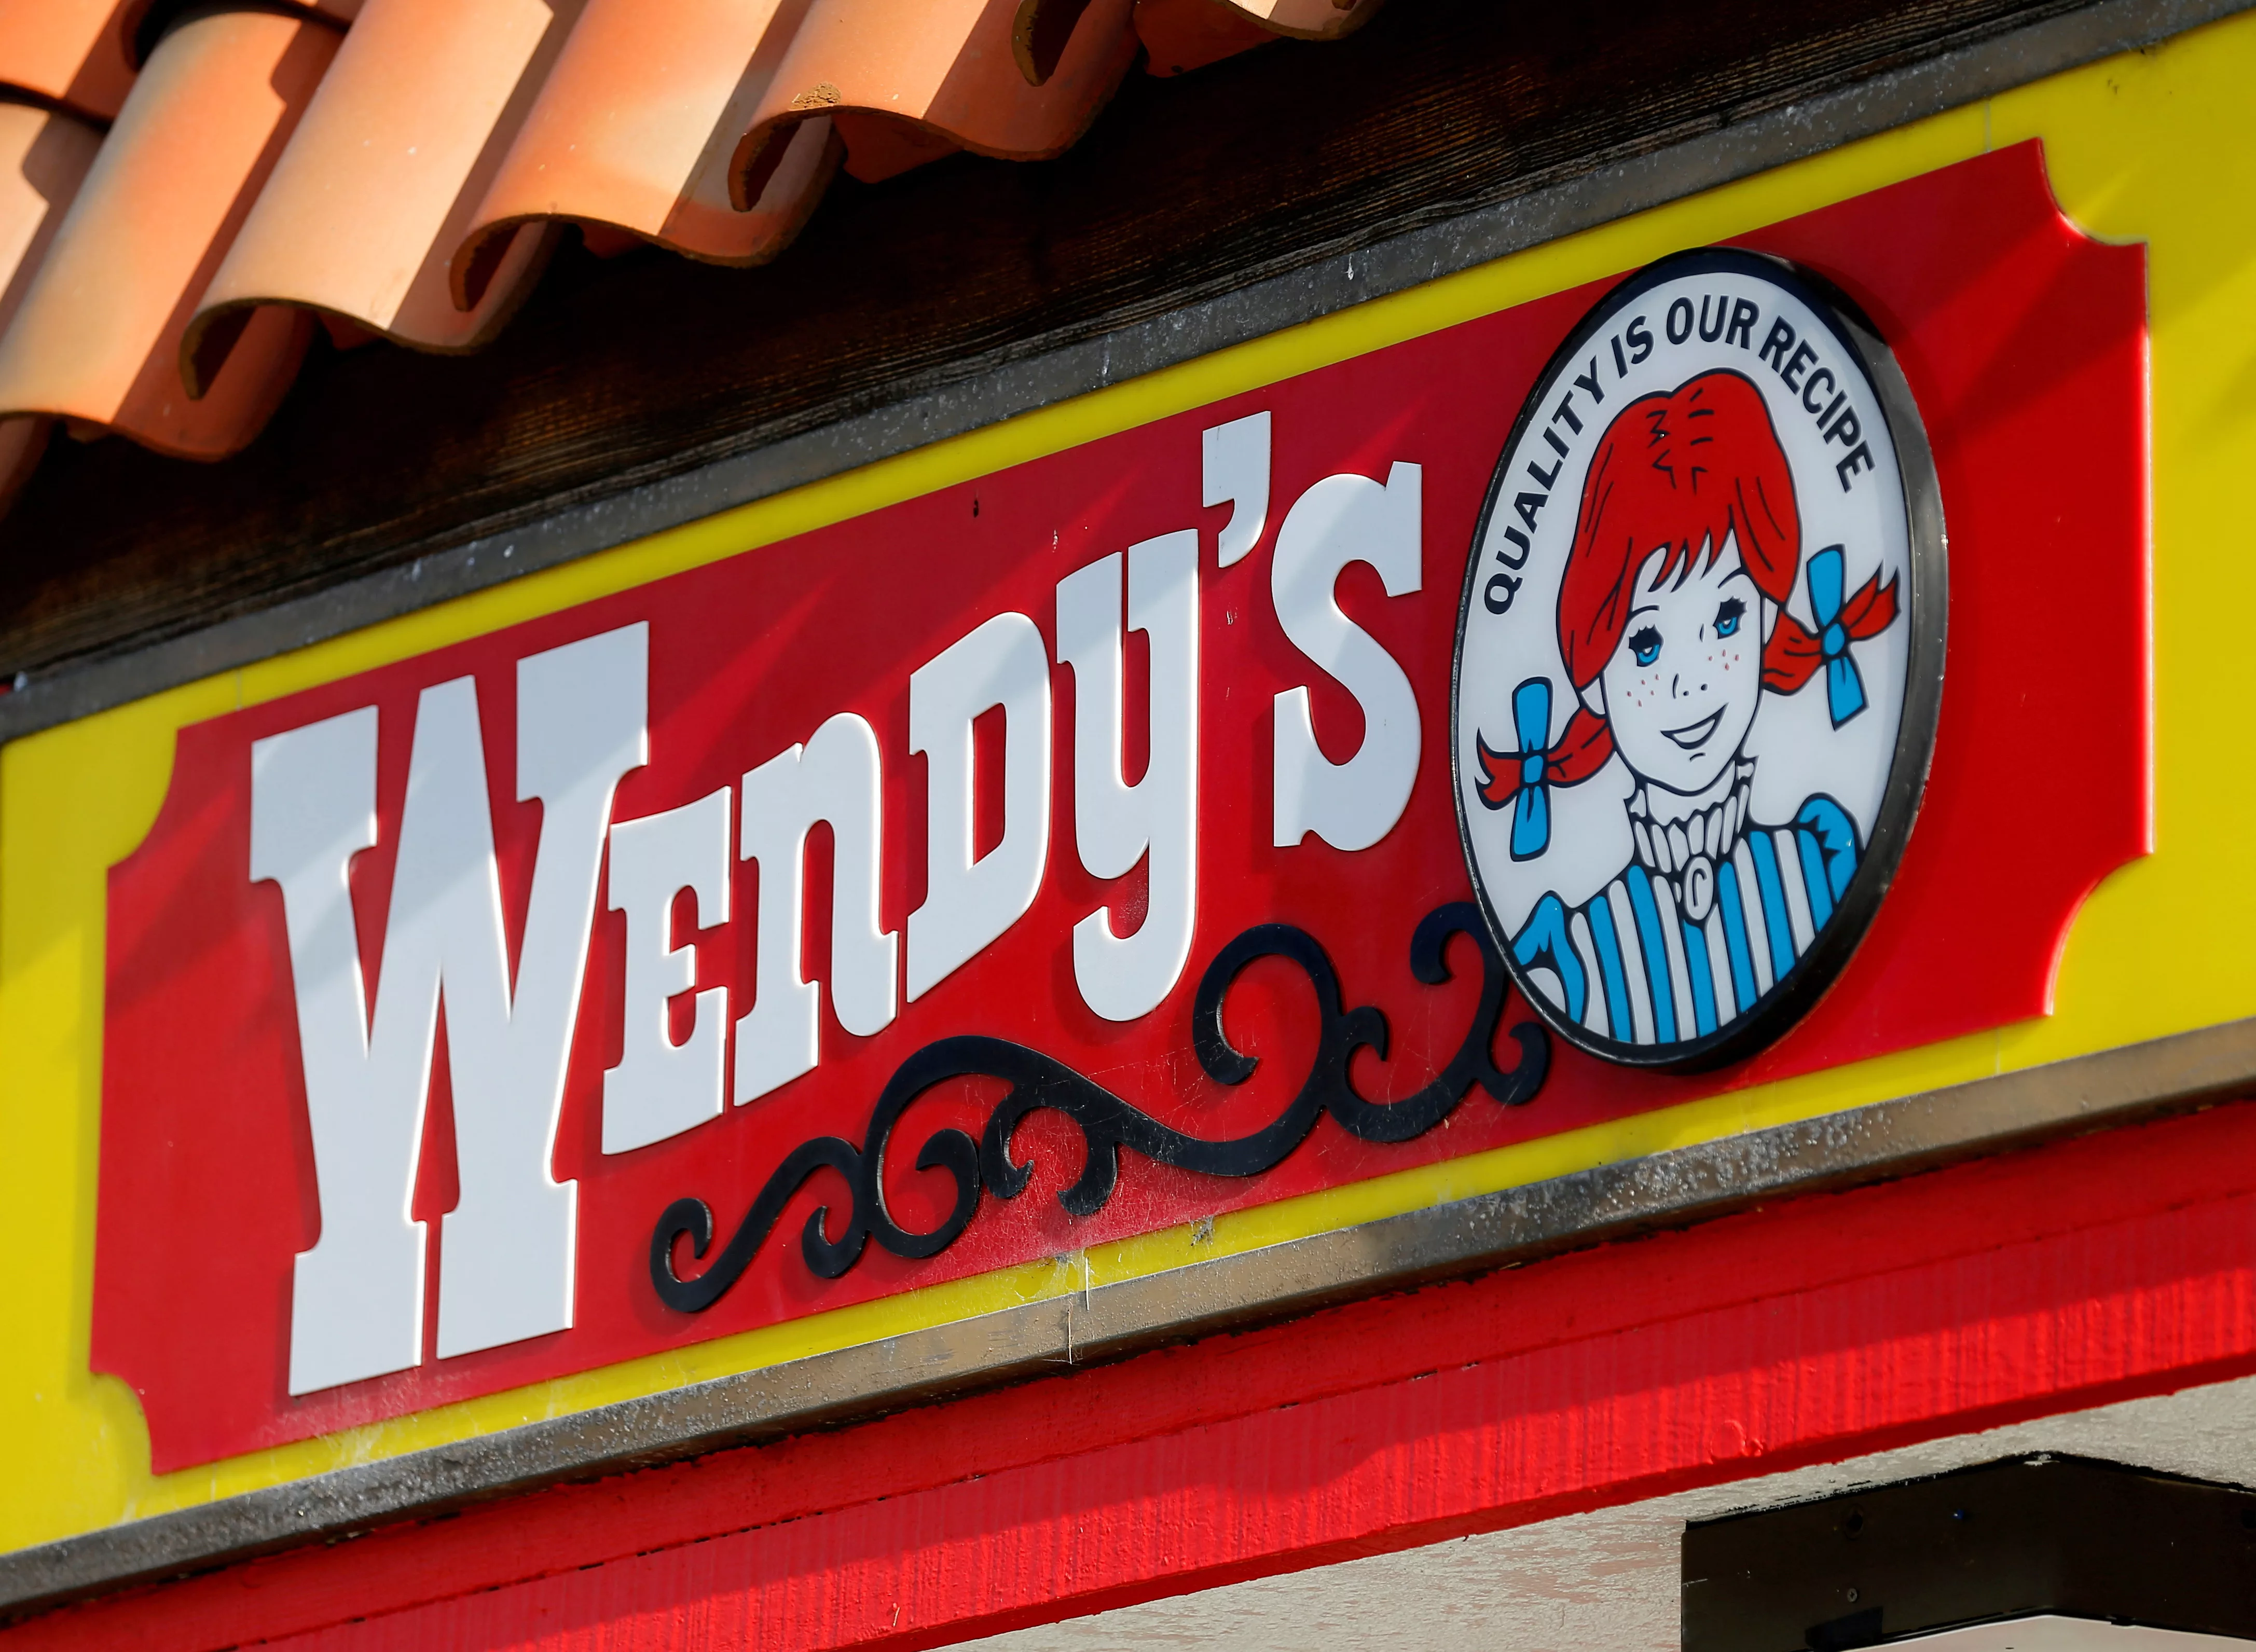 file-photo-a-wendys-sign-and-logo-are-shown-at-one-of-the-companys-restaurant-in-encinitas-california